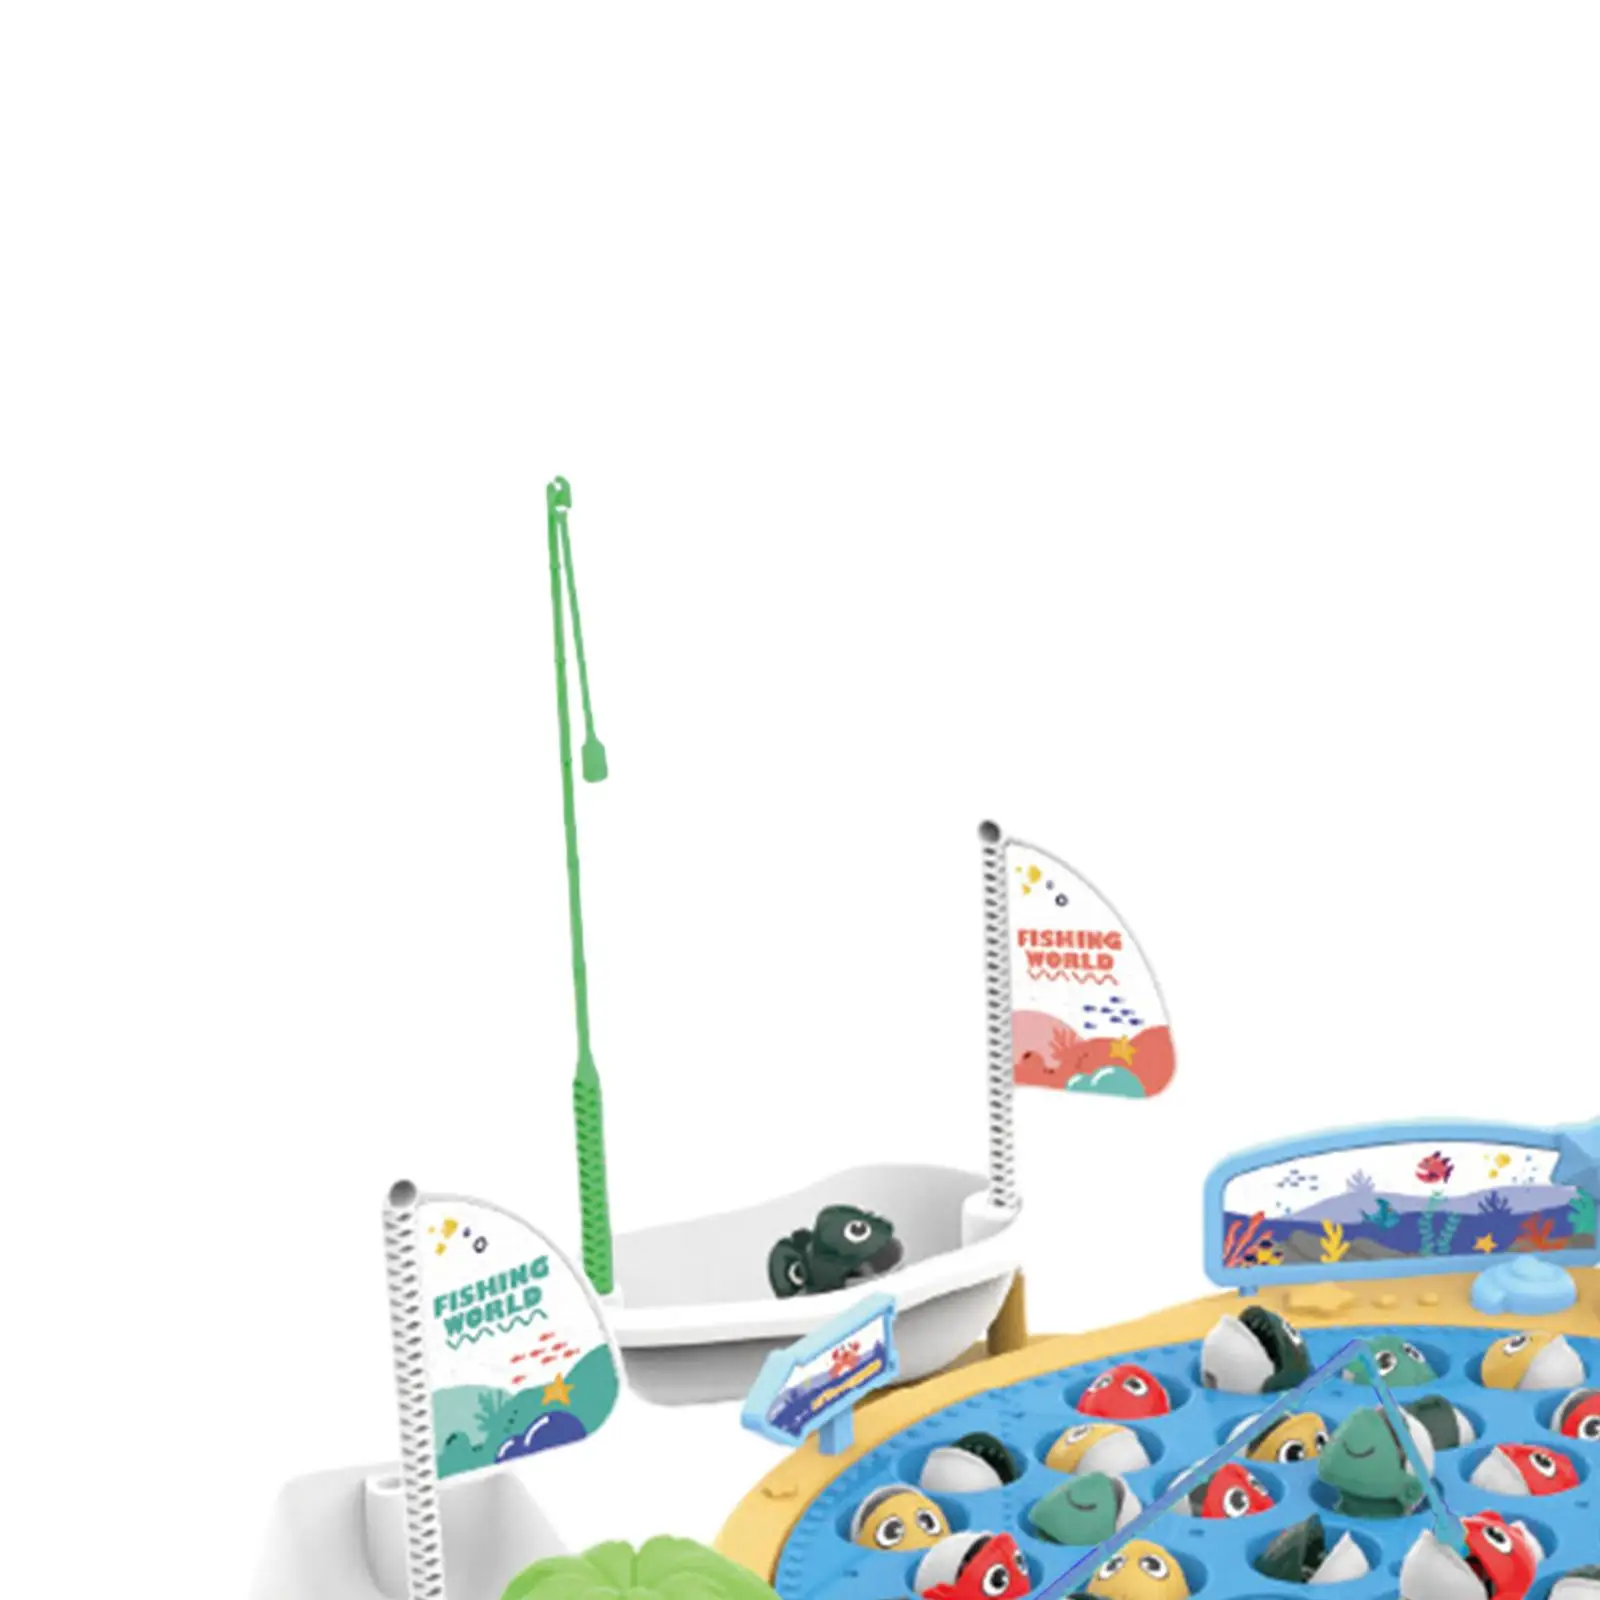 Electric Fishing Toy Learning Toys Party Favors Kids Fishing Toy Rotating Fishing Game Toy for Children Toddlers Holiday Gifts